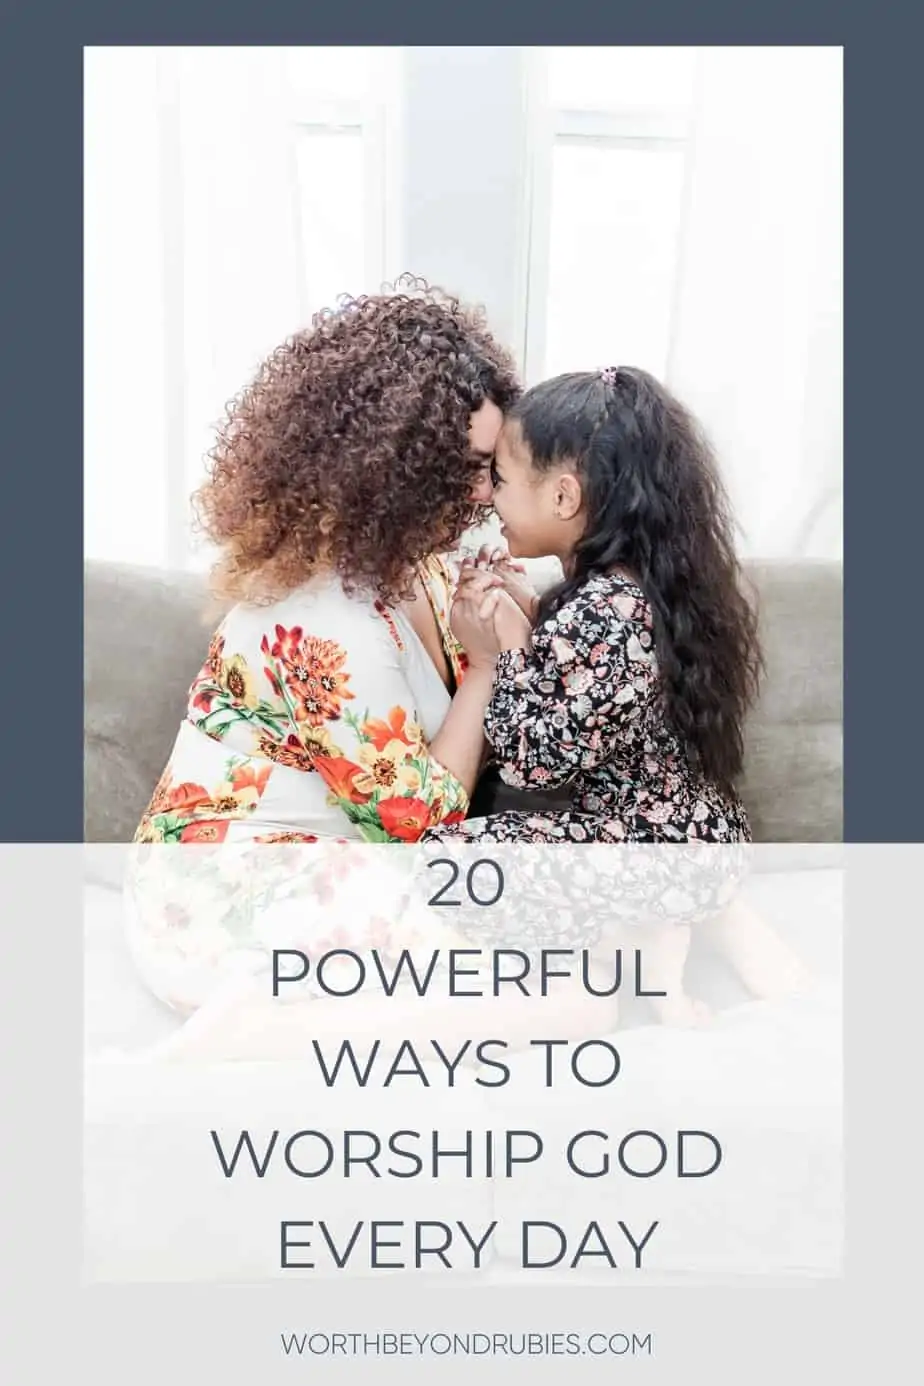 A woman and a child kneeling in front of eachother on a couch and text that says 20 Powerful Ways to Worship God Every Day